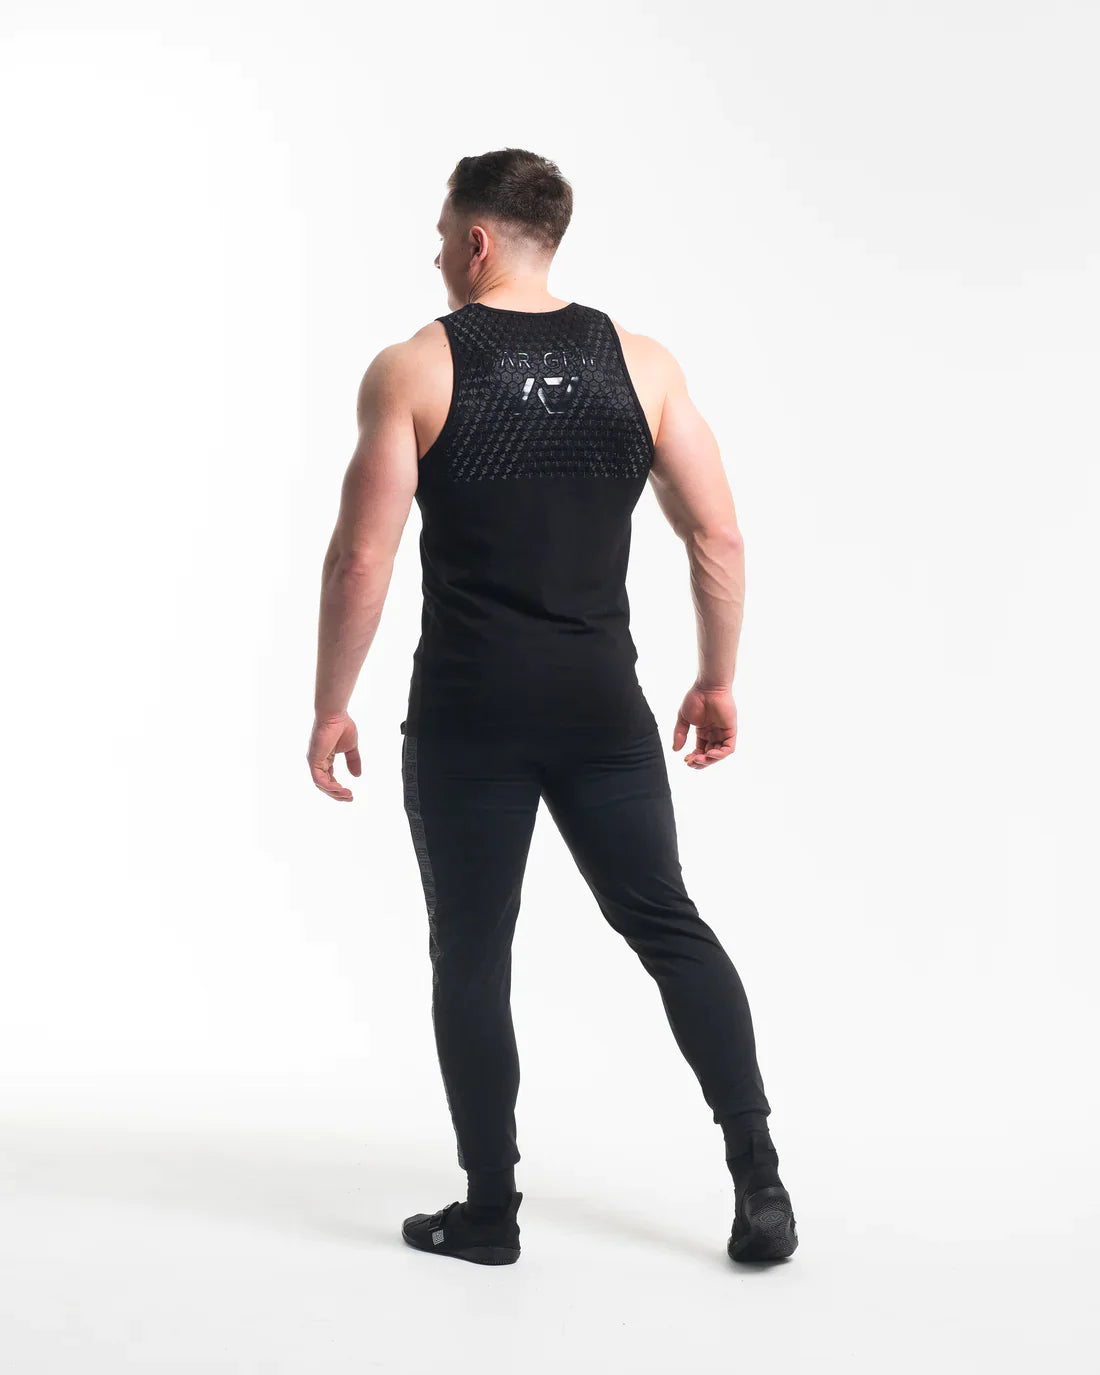 Stealth Bar Grip Tank T-shirt, great as a squat shirt. Purchase Stealth Bar Grip tshirt UK from A7 UK. Purchase Stealth Bar Grip Shirt Europe from A7 UK. No more chalk and no more sliding. Best Bar Grip Tshirts, shipping to UK and Europe from A7 UK. Stealth is our classic black on black shirt design! The best Powerlifting apparel for all your workouts. Available in UK and Europe including France, Italy, Germany, Sweden and Poland